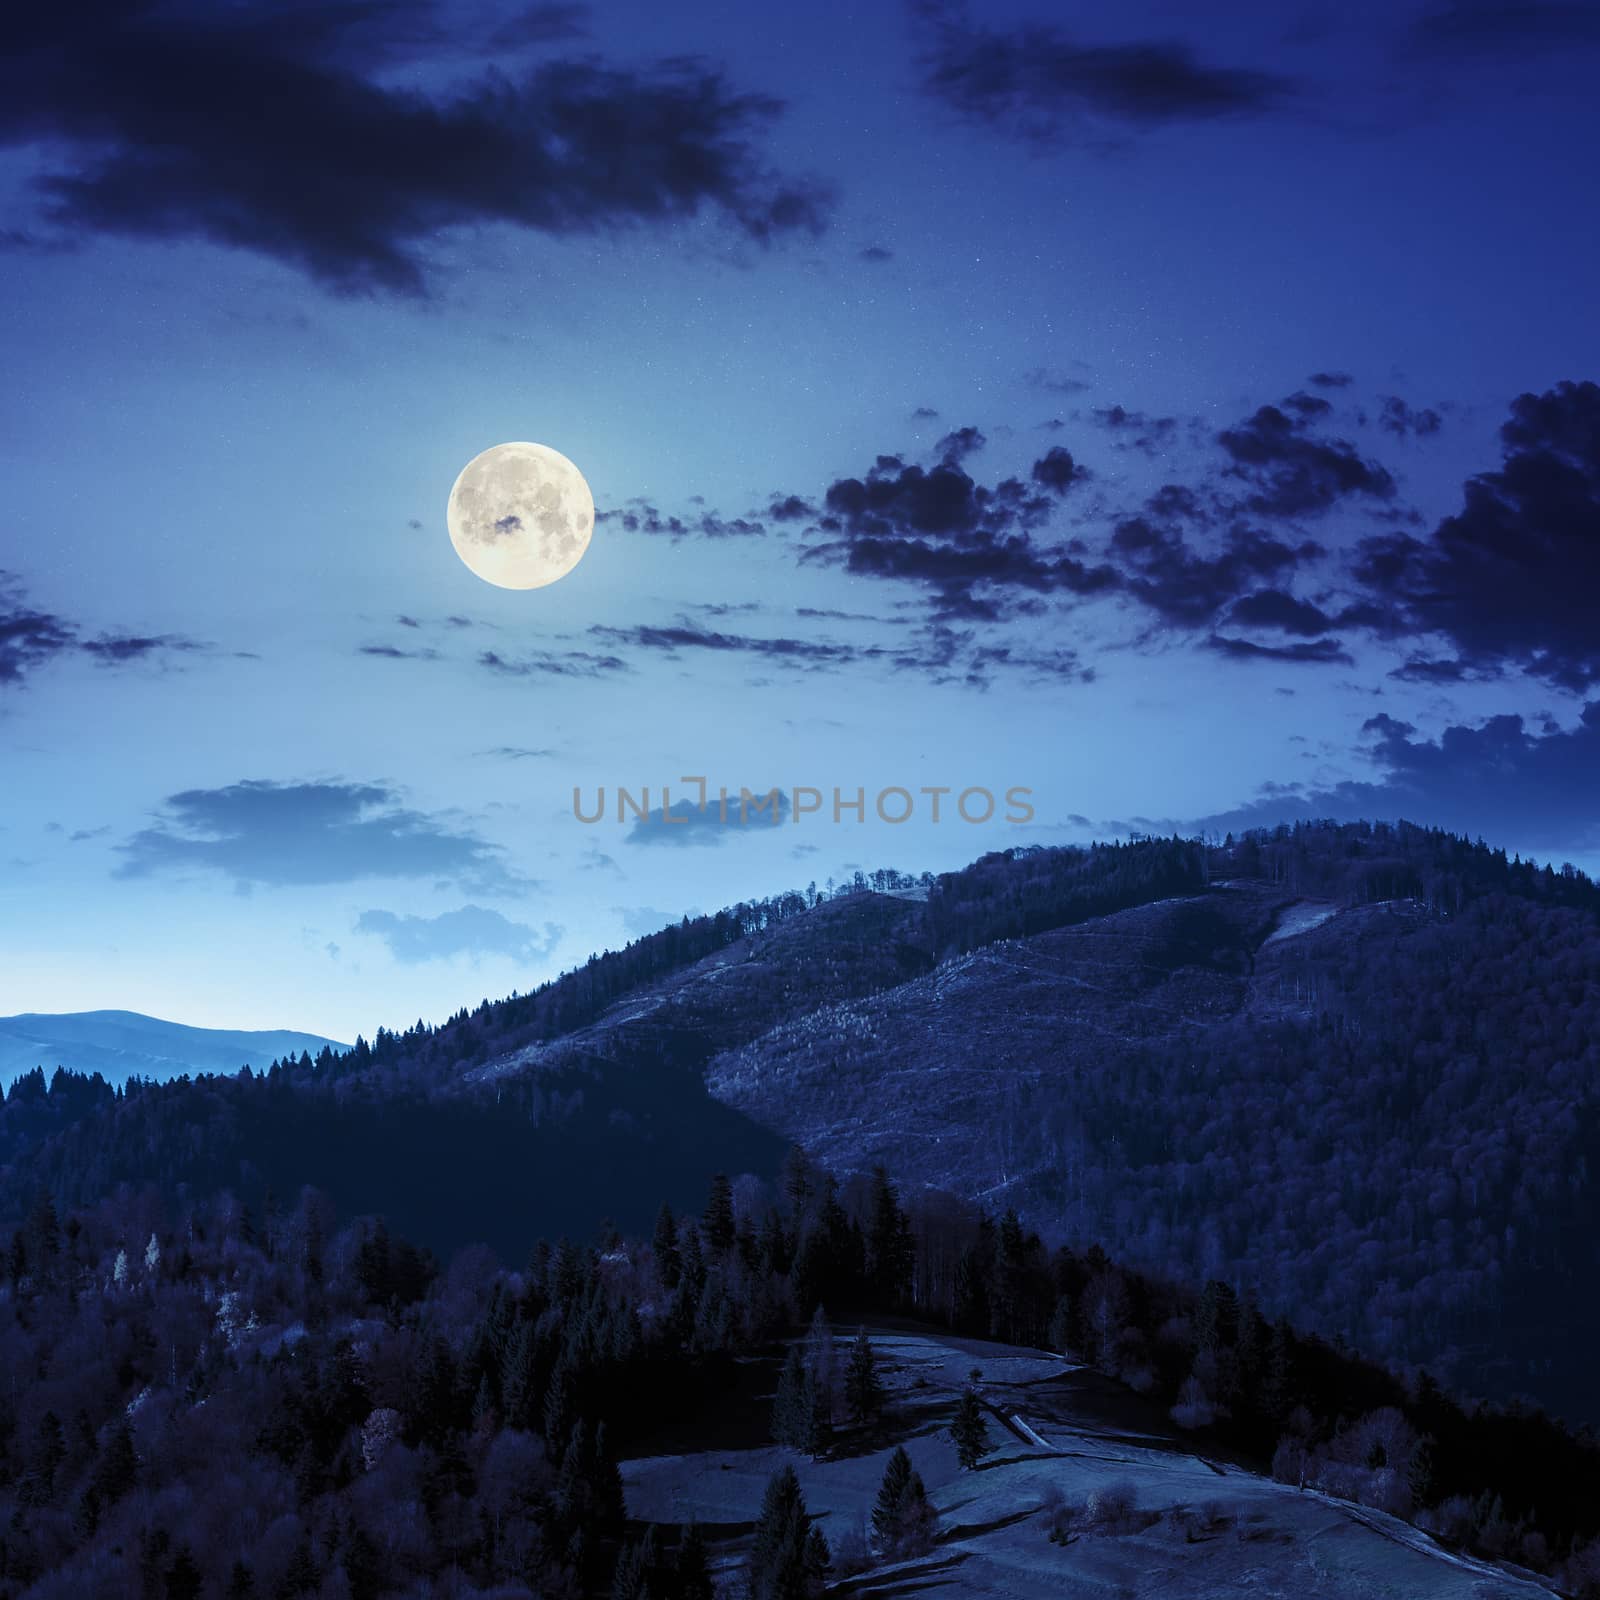 mountain summer landscape. pine trees near meadow and forest on hillside at night in full moon light